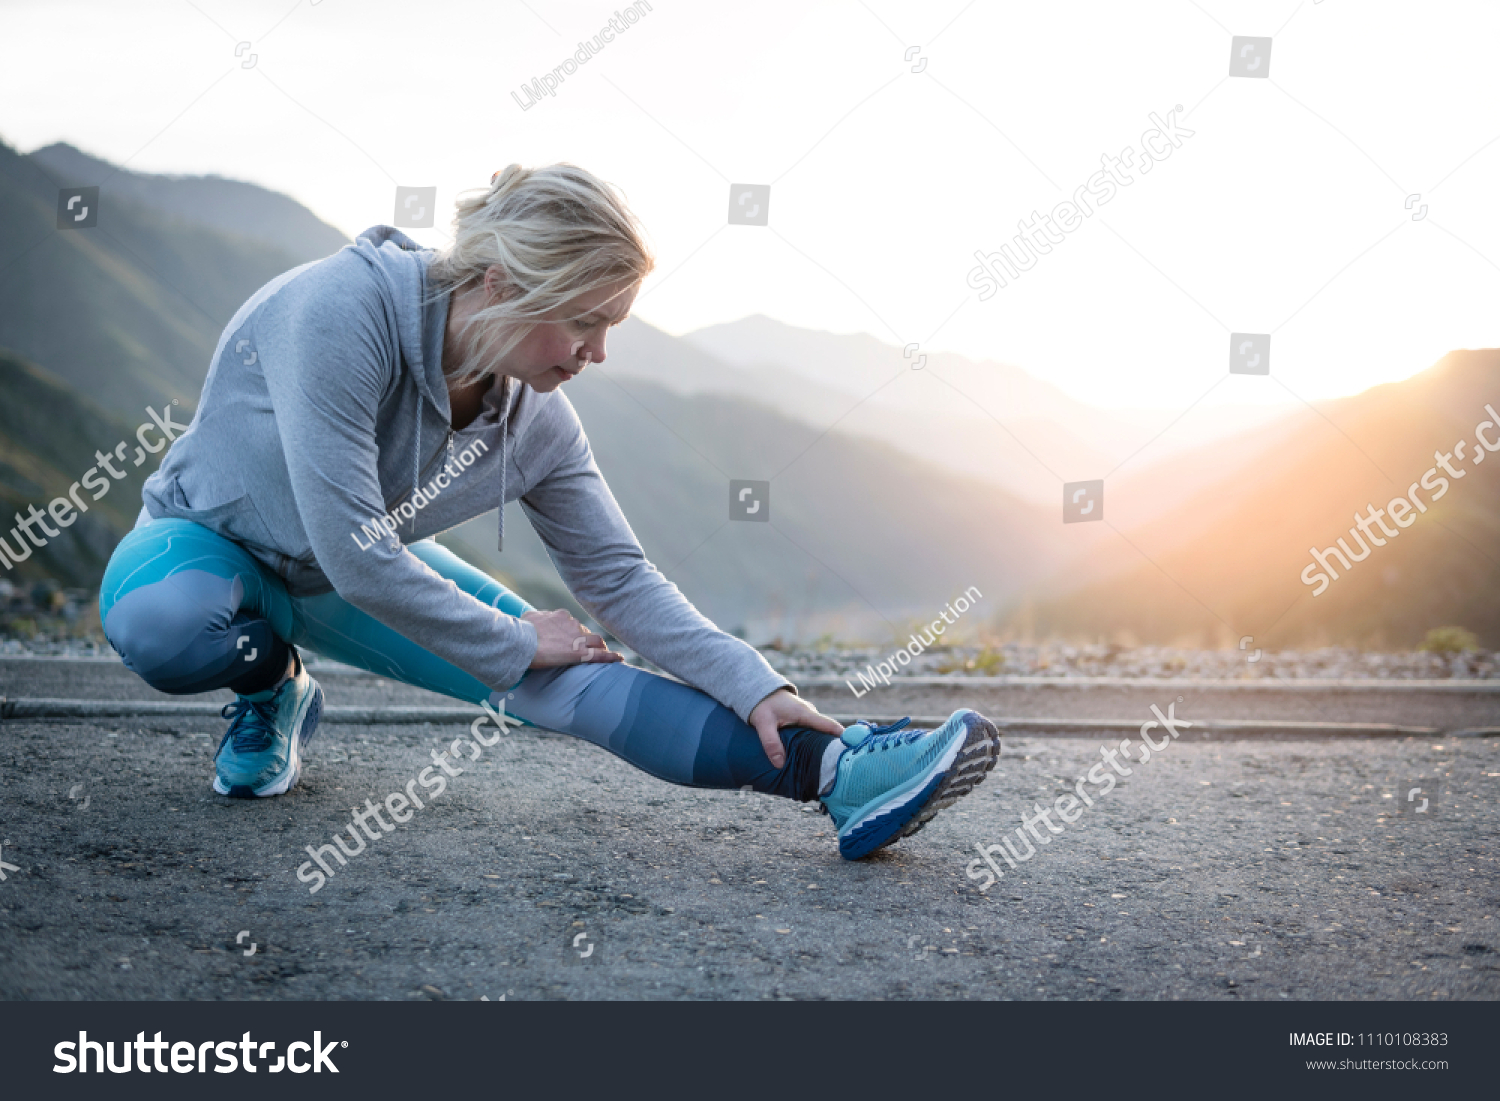 Exercising adult woman outdoors. Sports and recreation #1110108383